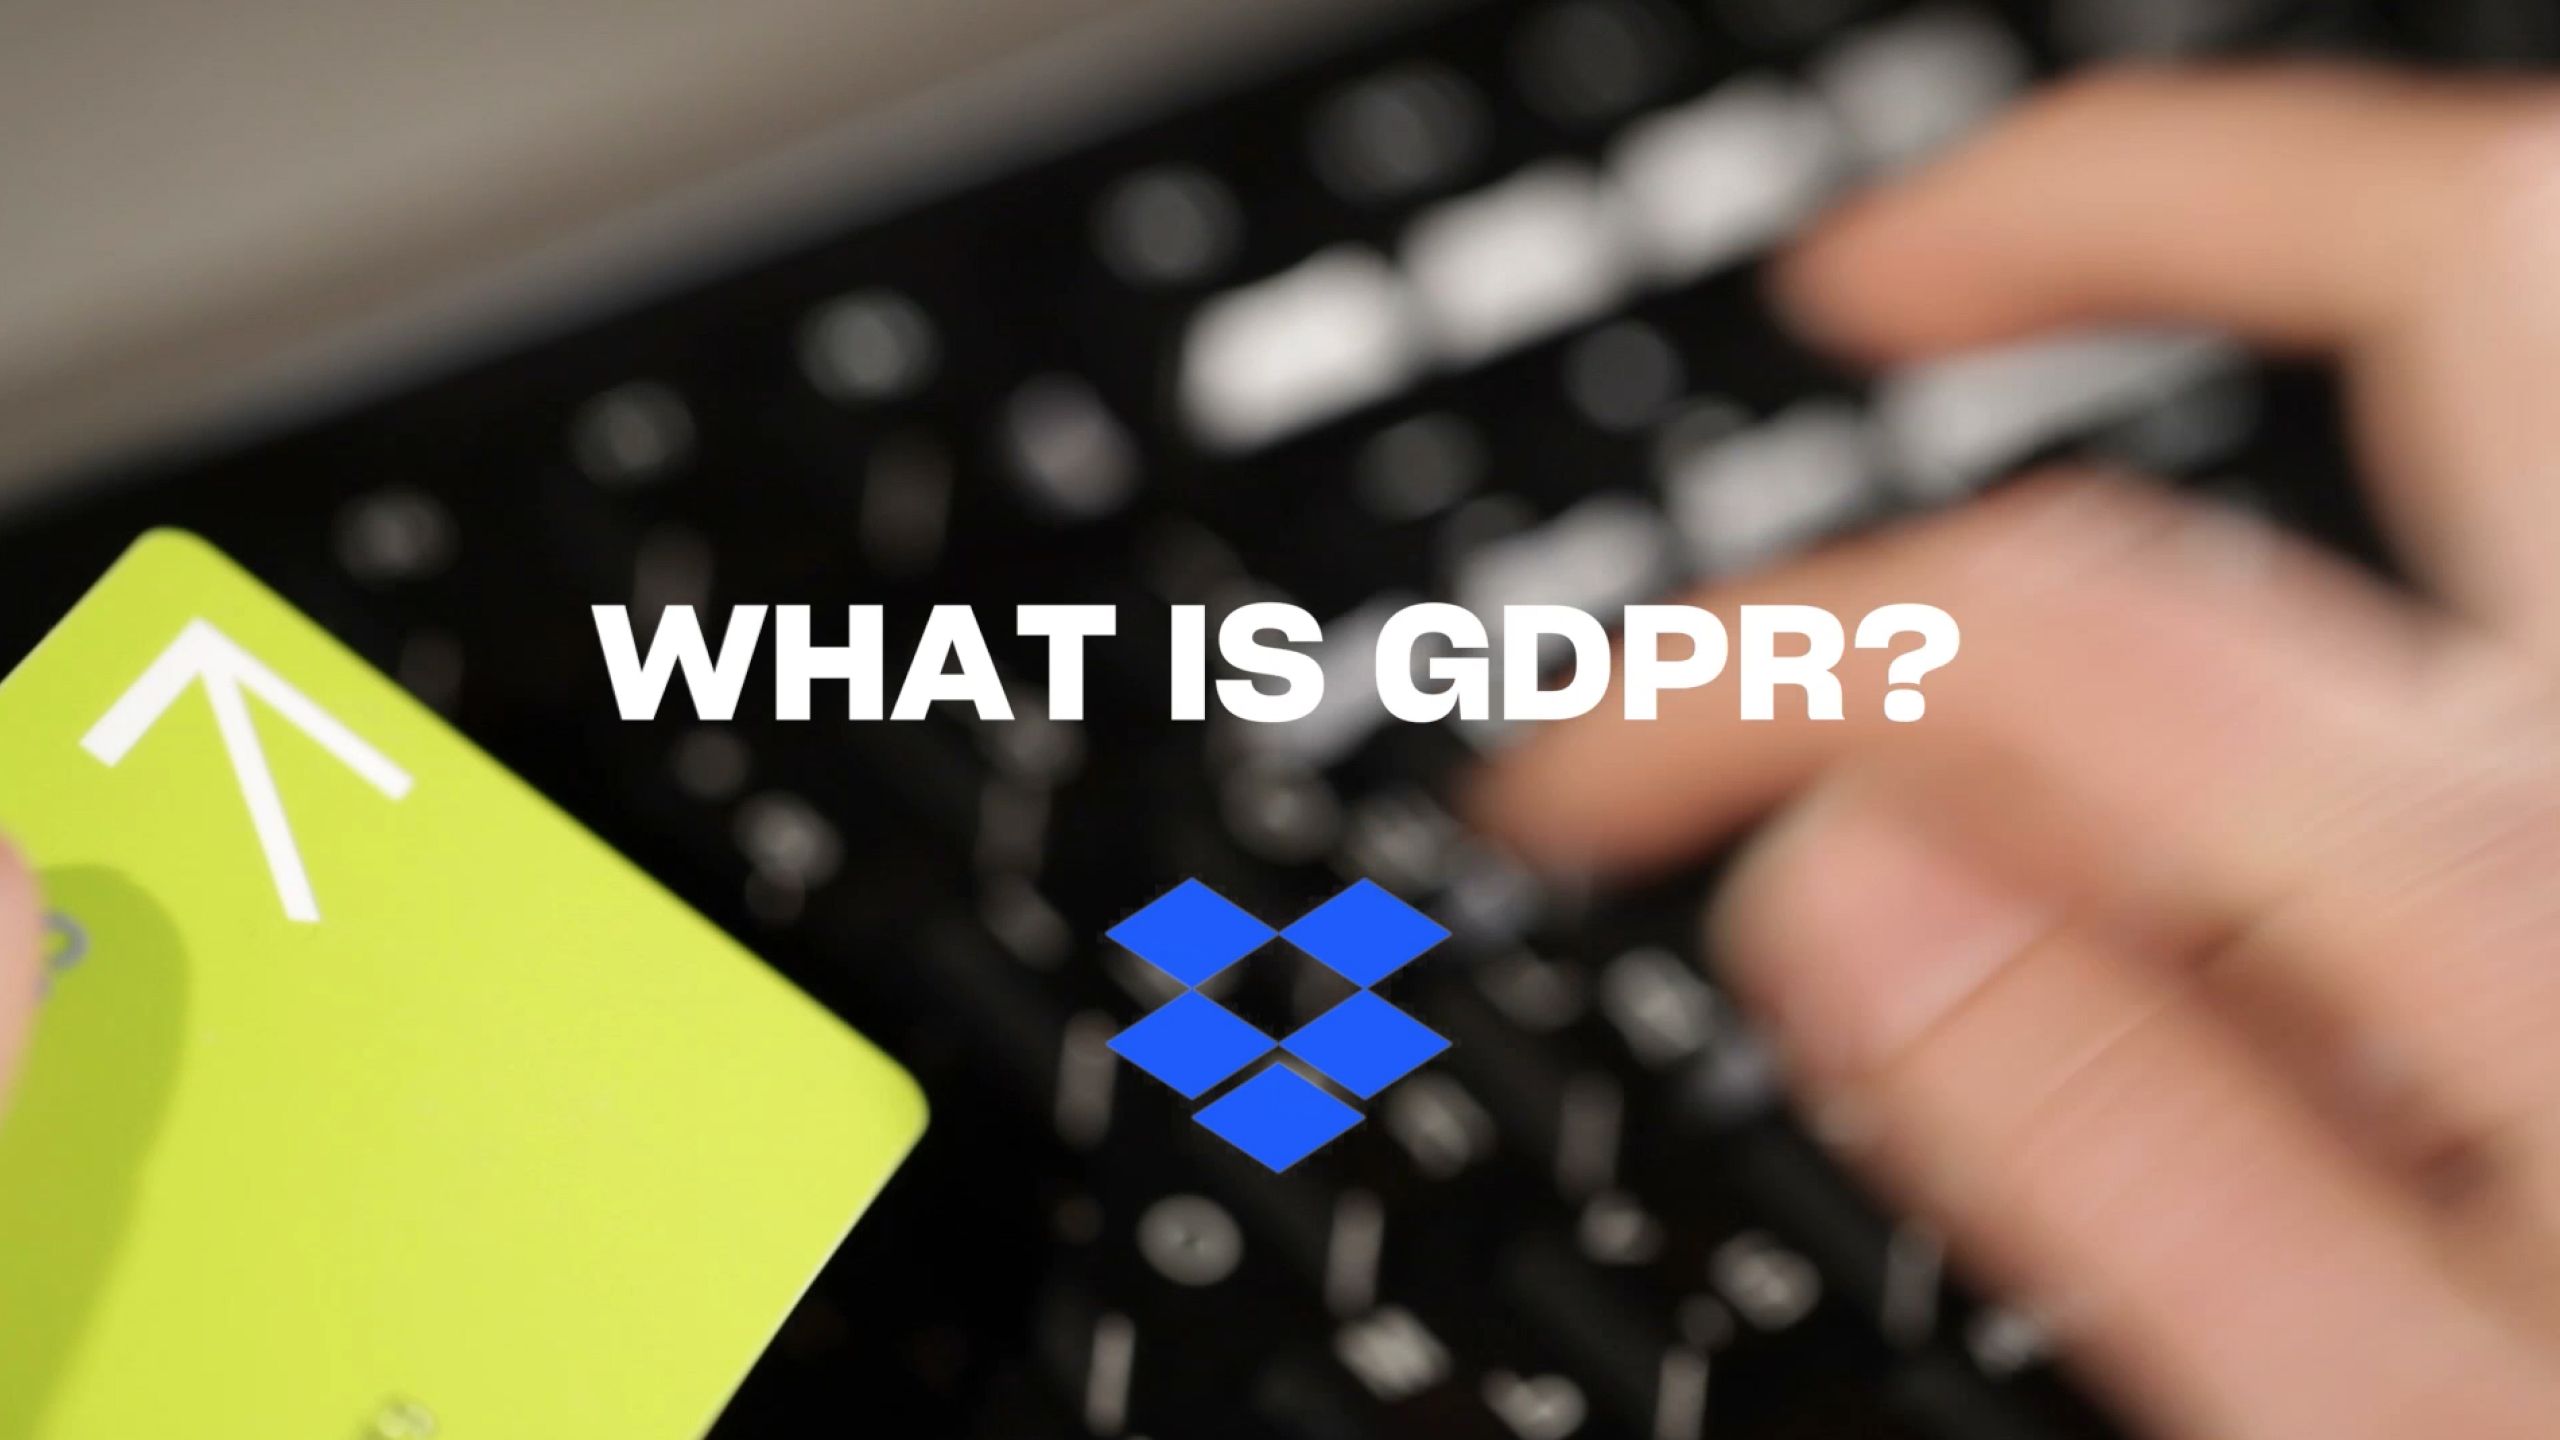 A video that answers the question “What is GDPR?”